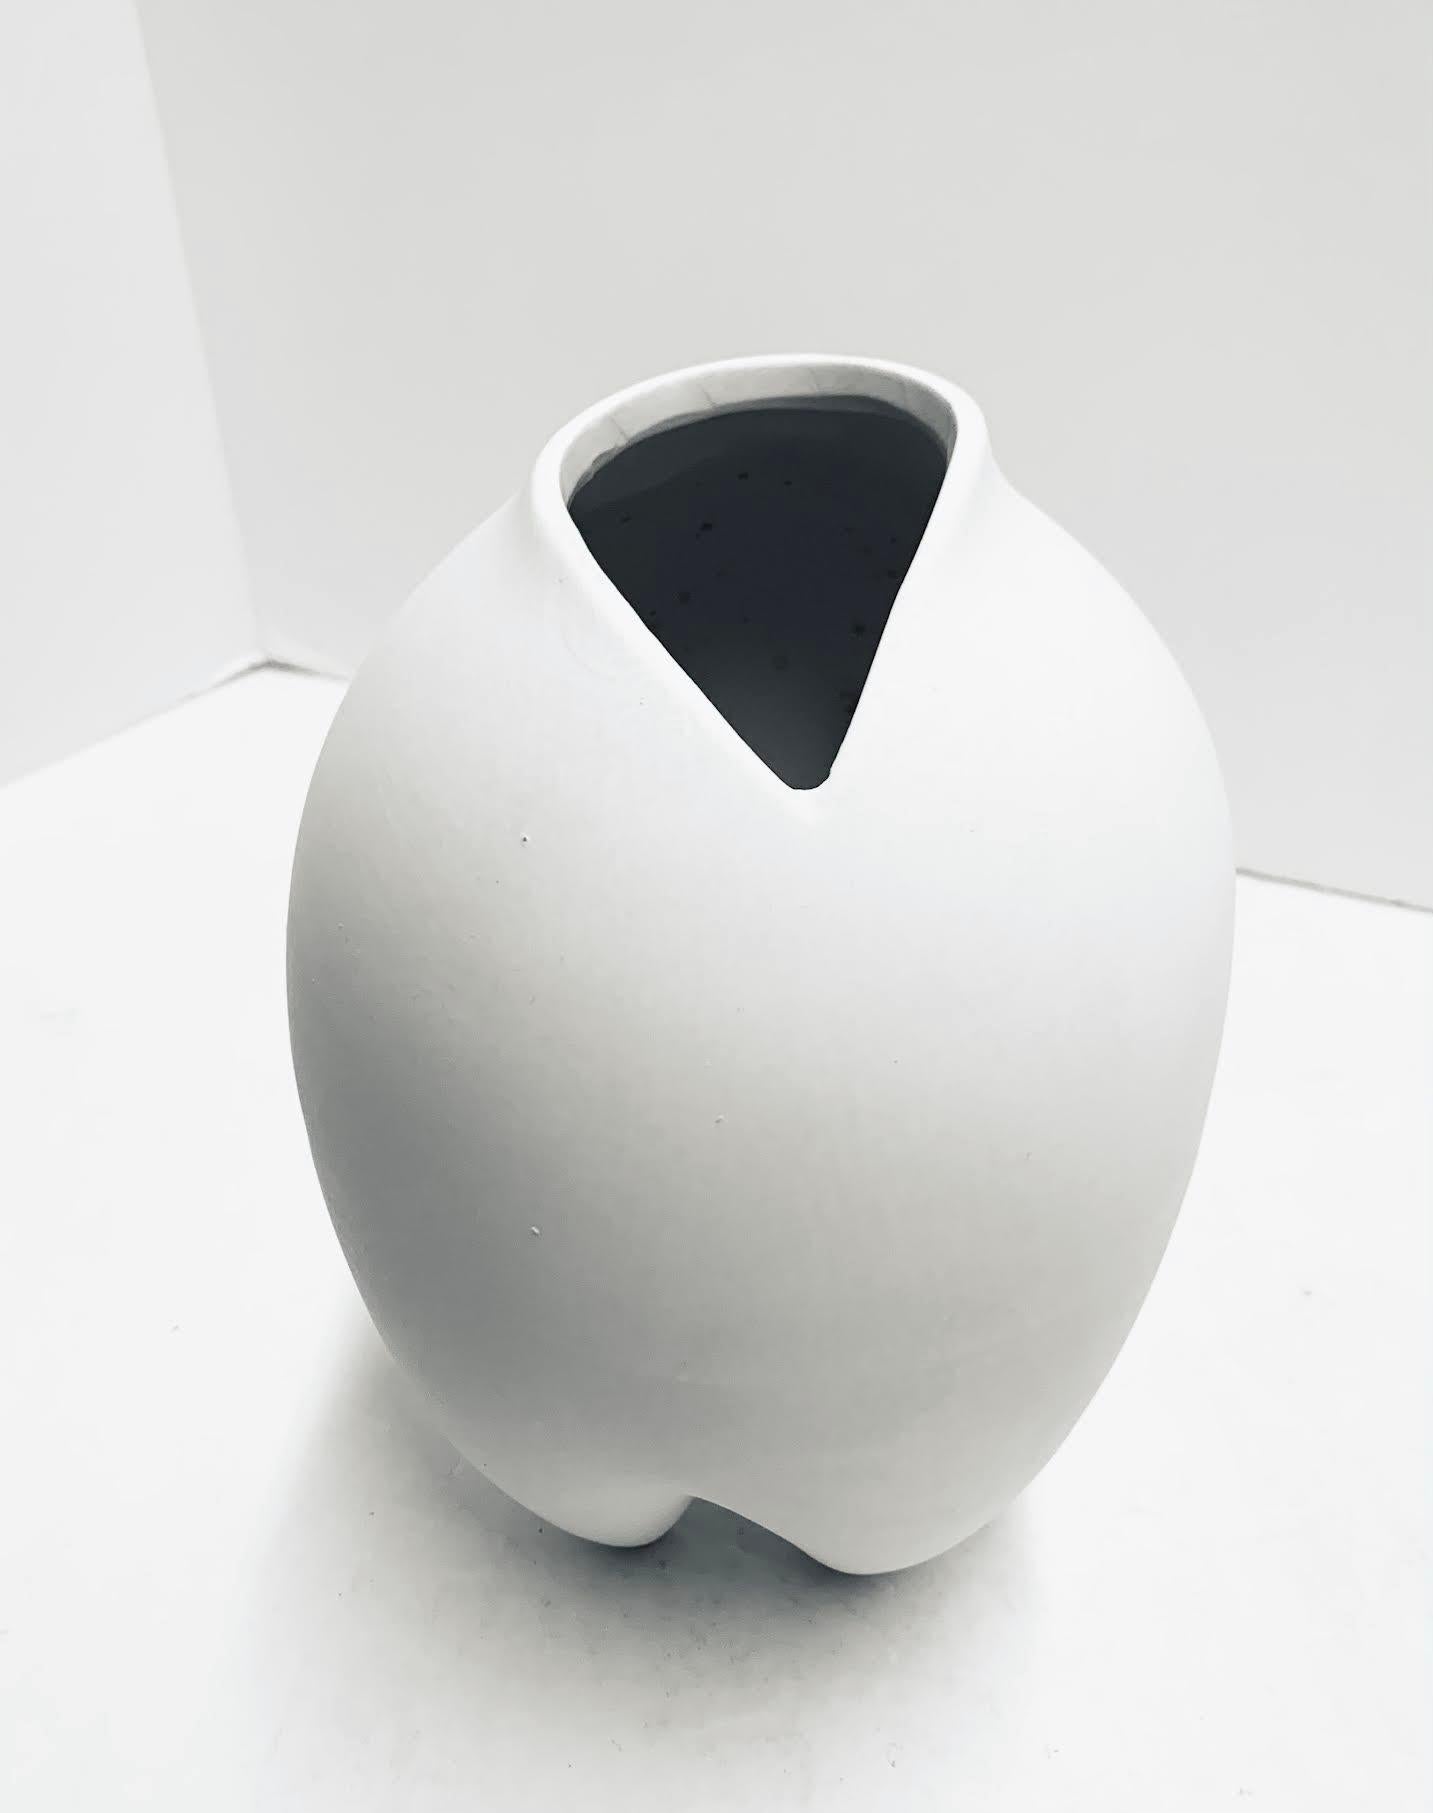 Contemporary Danish designed bone white slim vase.
Three pointed V shaped base.
Part of a very large collection.